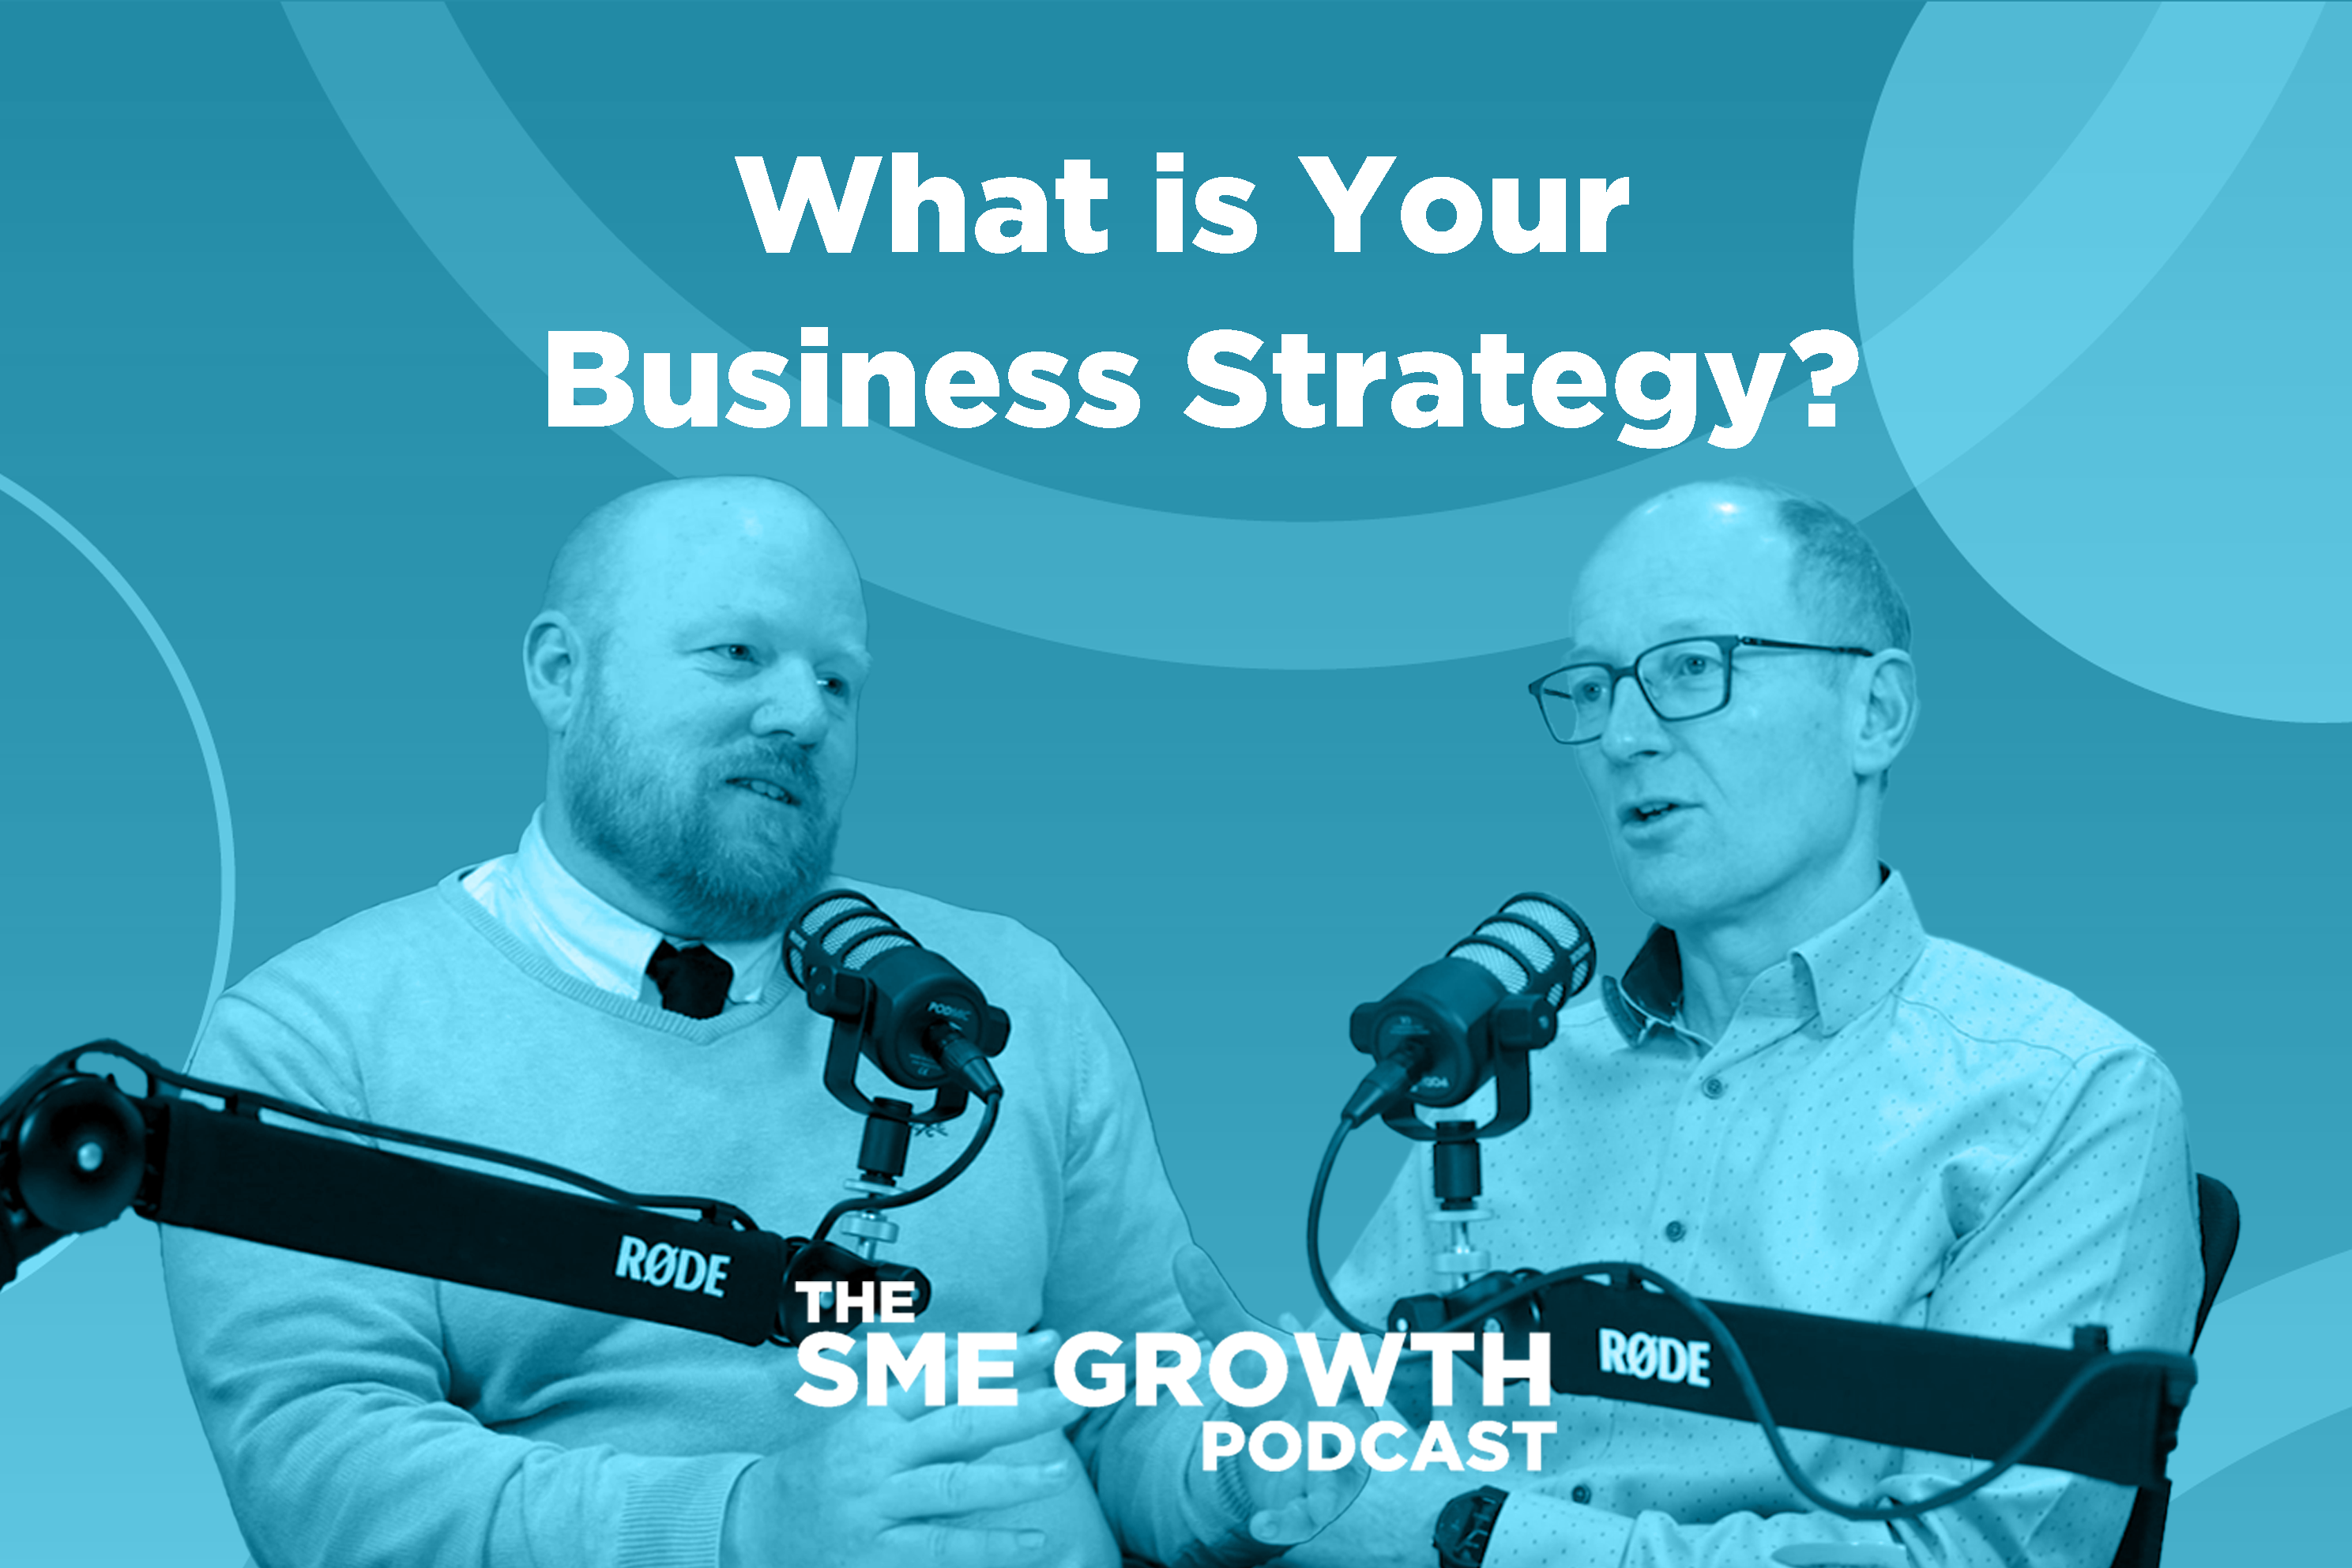 What is your business strategy? The SME Growth podcast. Blue banner with two males speaking into microphones.